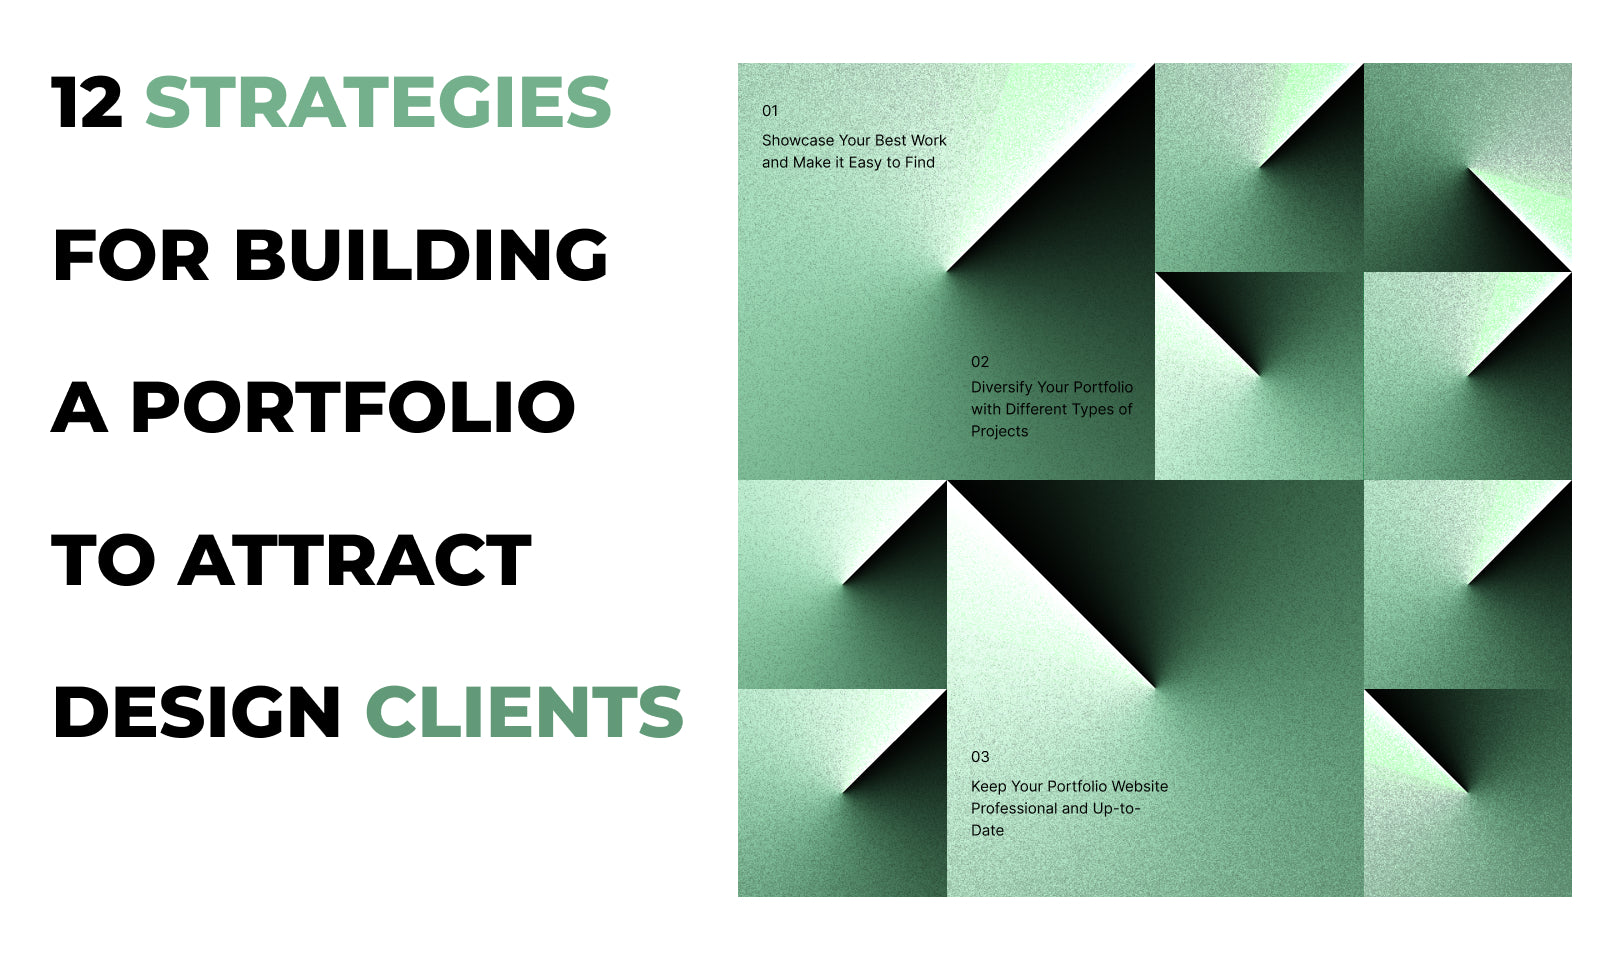 12 Strategies for Building a Portfolio to Attract Design Clients